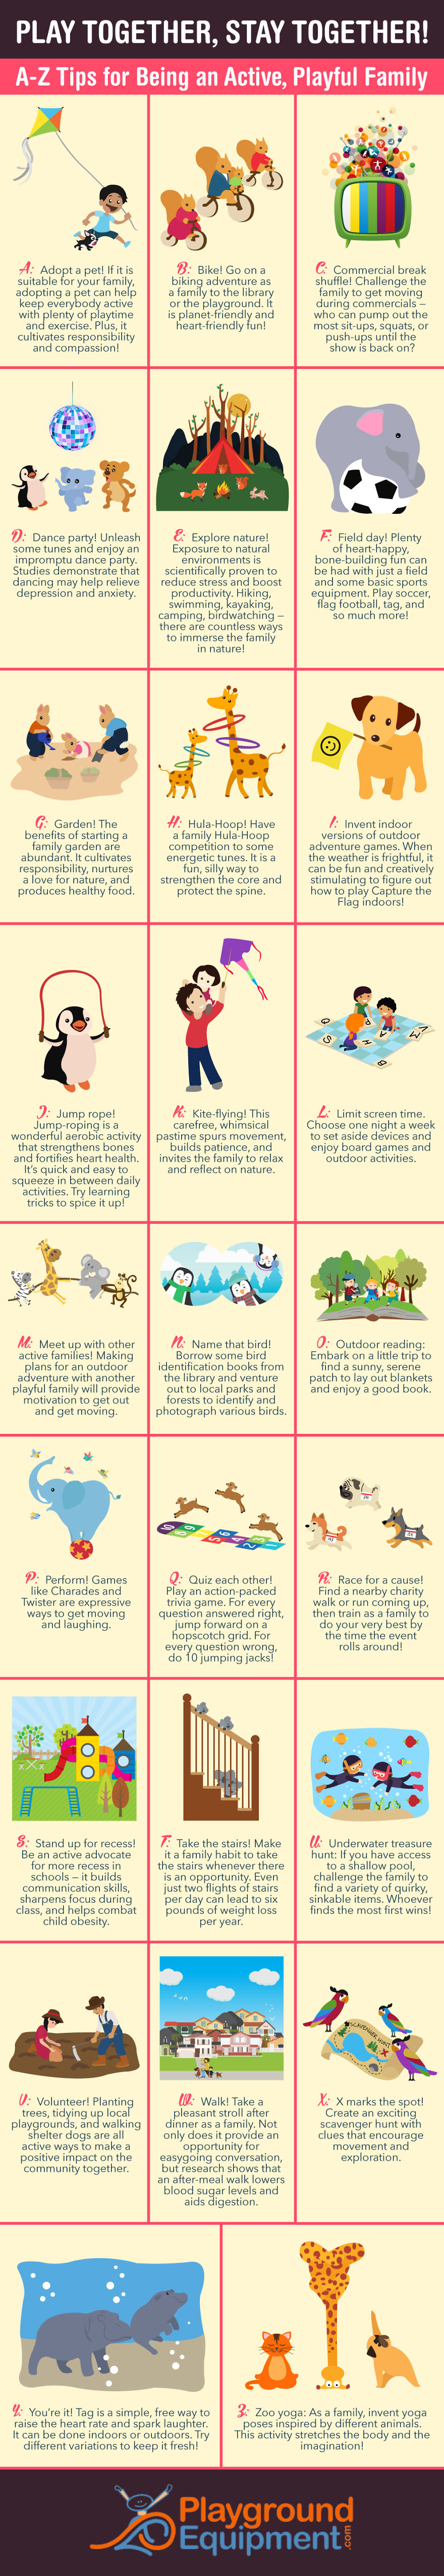 A To Z Activities To Get Active As A Family